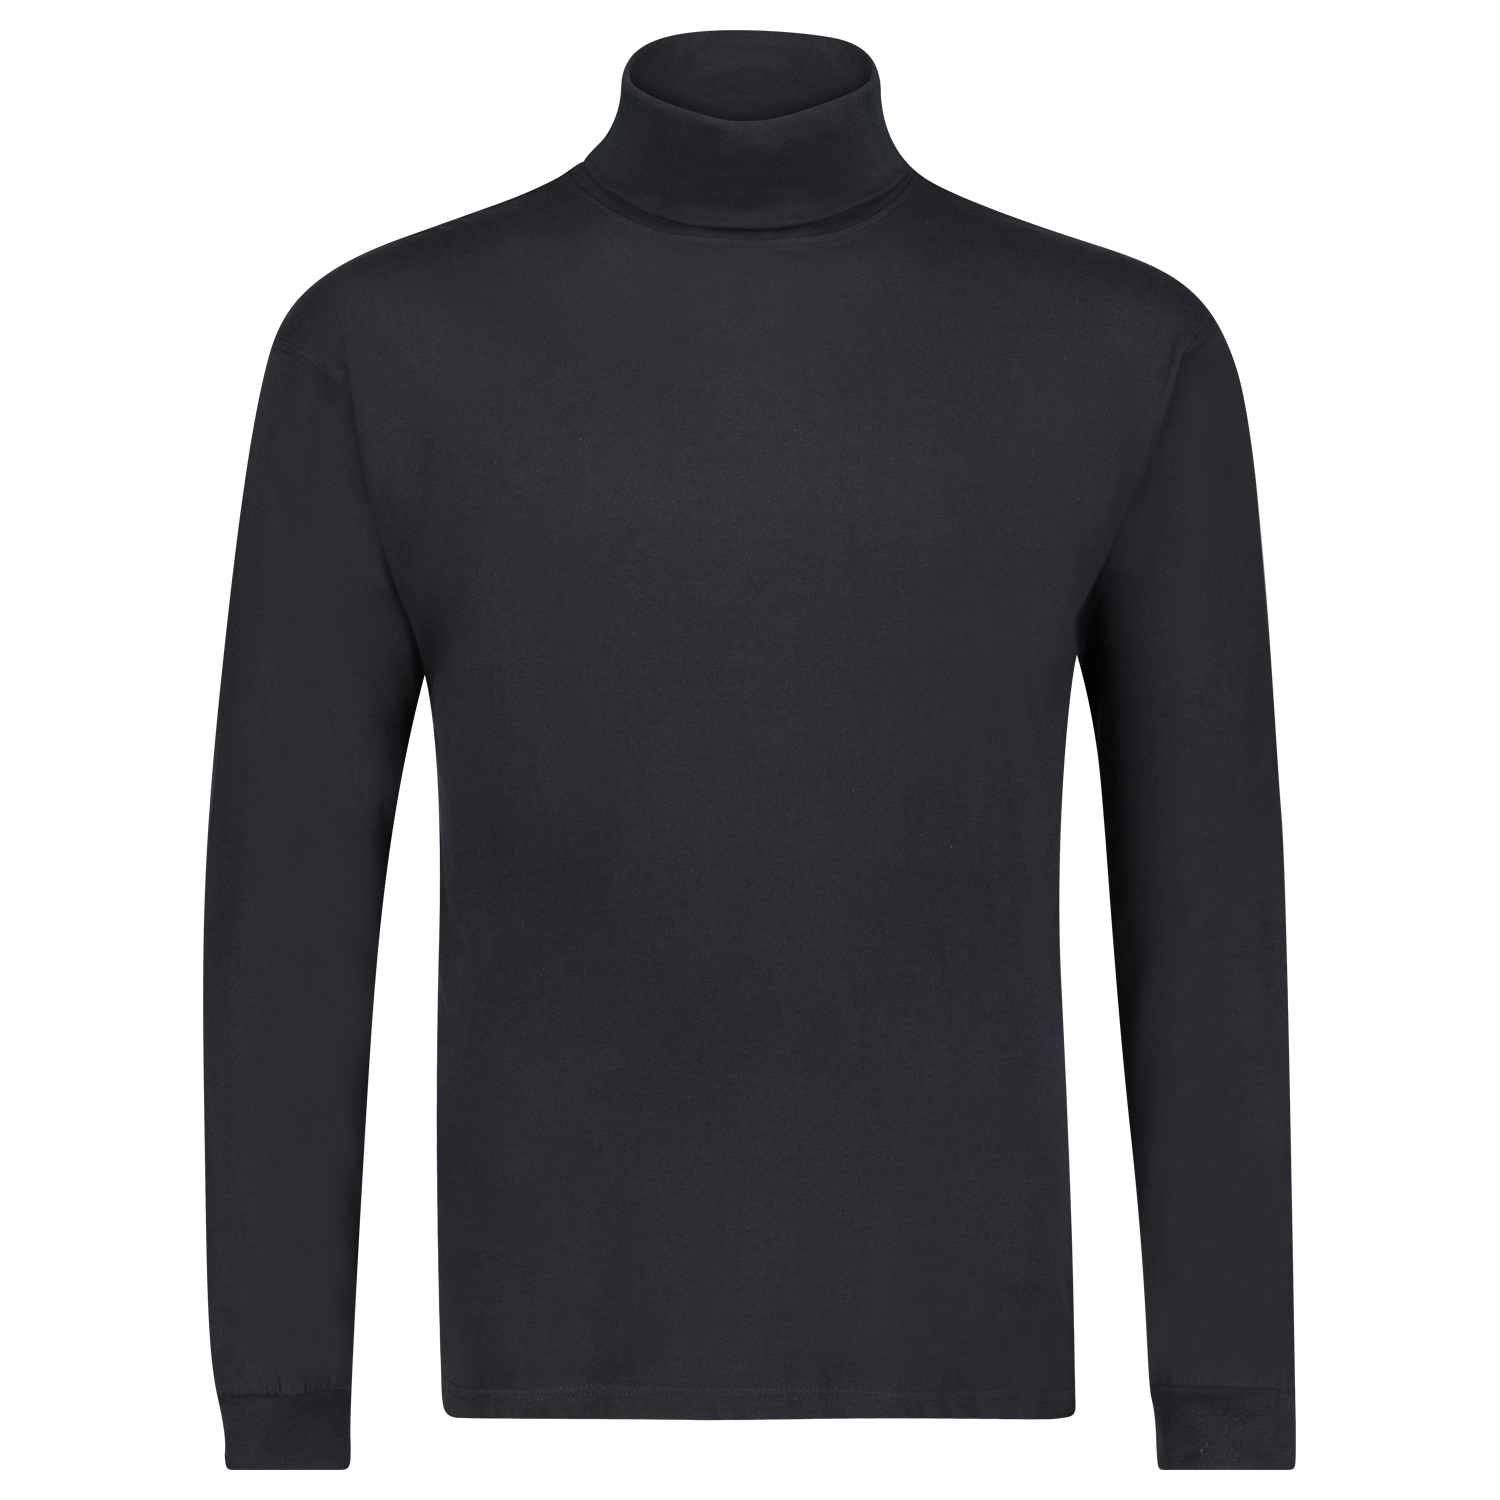 Longsleeve for men COMFORT FIT with turtle neck in black by ADAMO in size 2XL up to oversize 12XL